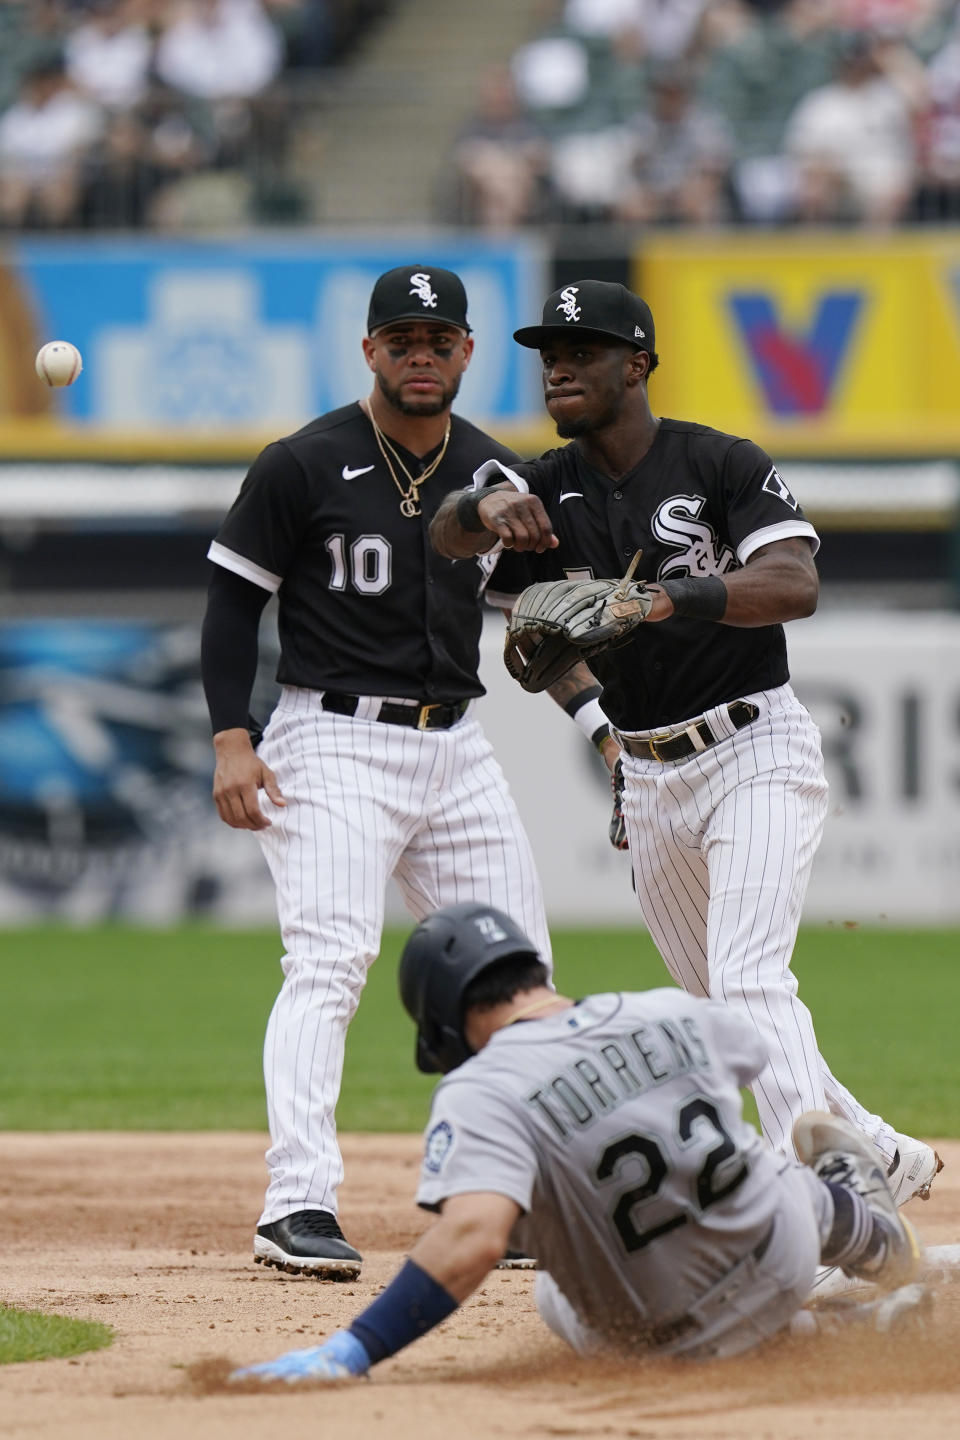 Chicago White Sox third baseman Yoan Moncada, left, watches as shortstop Tim Anderson, right, throws out Seattle Mariners' Jake Fraley at first after forcing out Luis Torrens (22) at second during the third inning of a baseball game in Chicago, Saturday, June 26, 2021. (AP Photo/Nam Y. Huh)